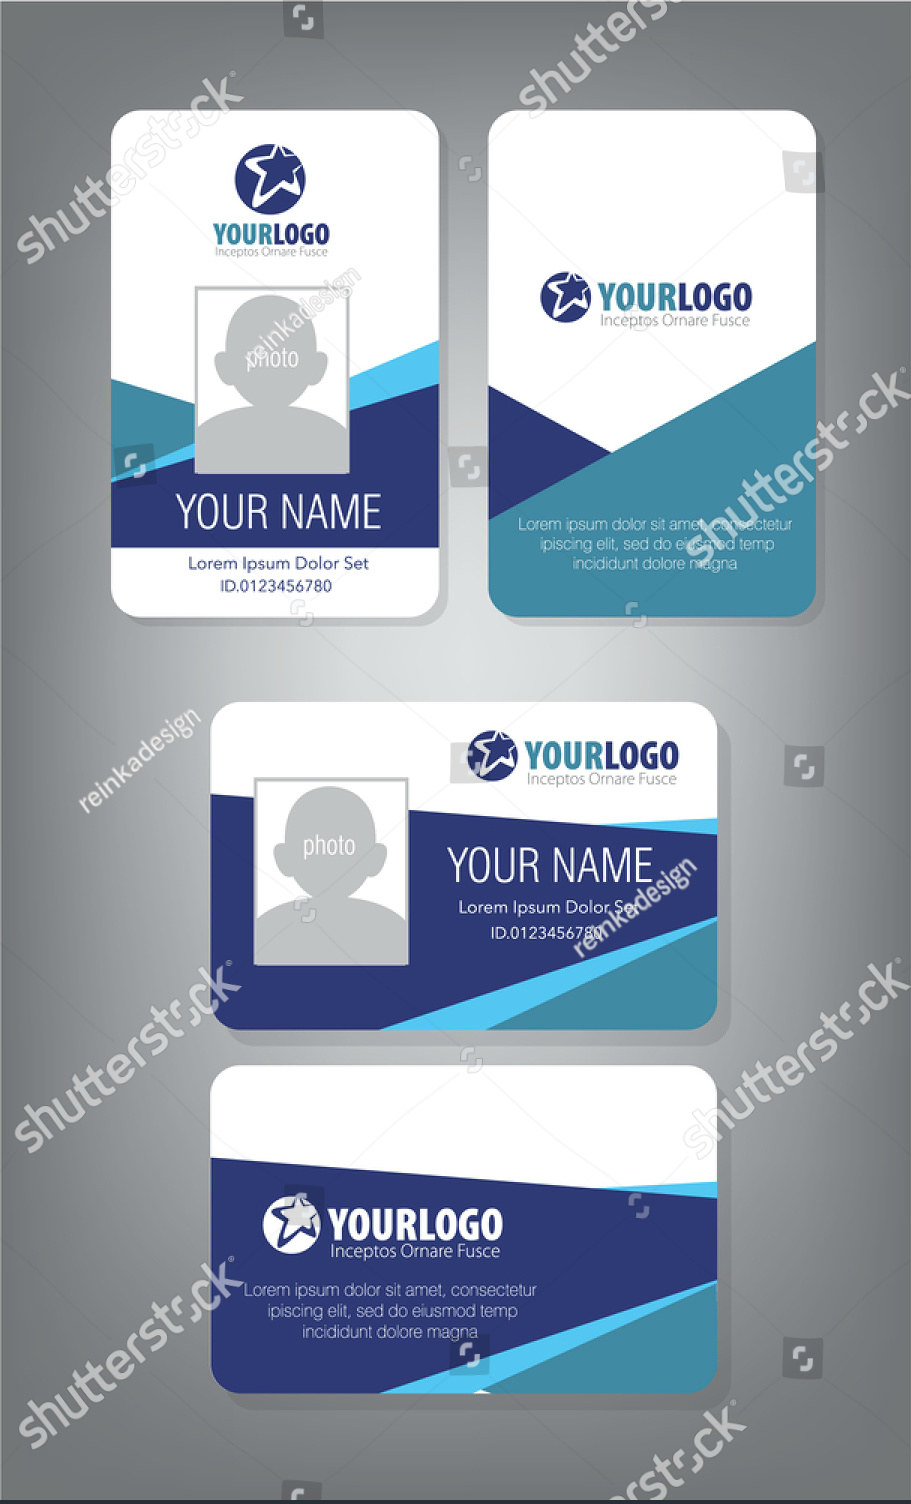 43+ Professional Id Card Designs – Psd, Eps, Ai, Word | Free Intended For Id Card Design Template Psd Free Download